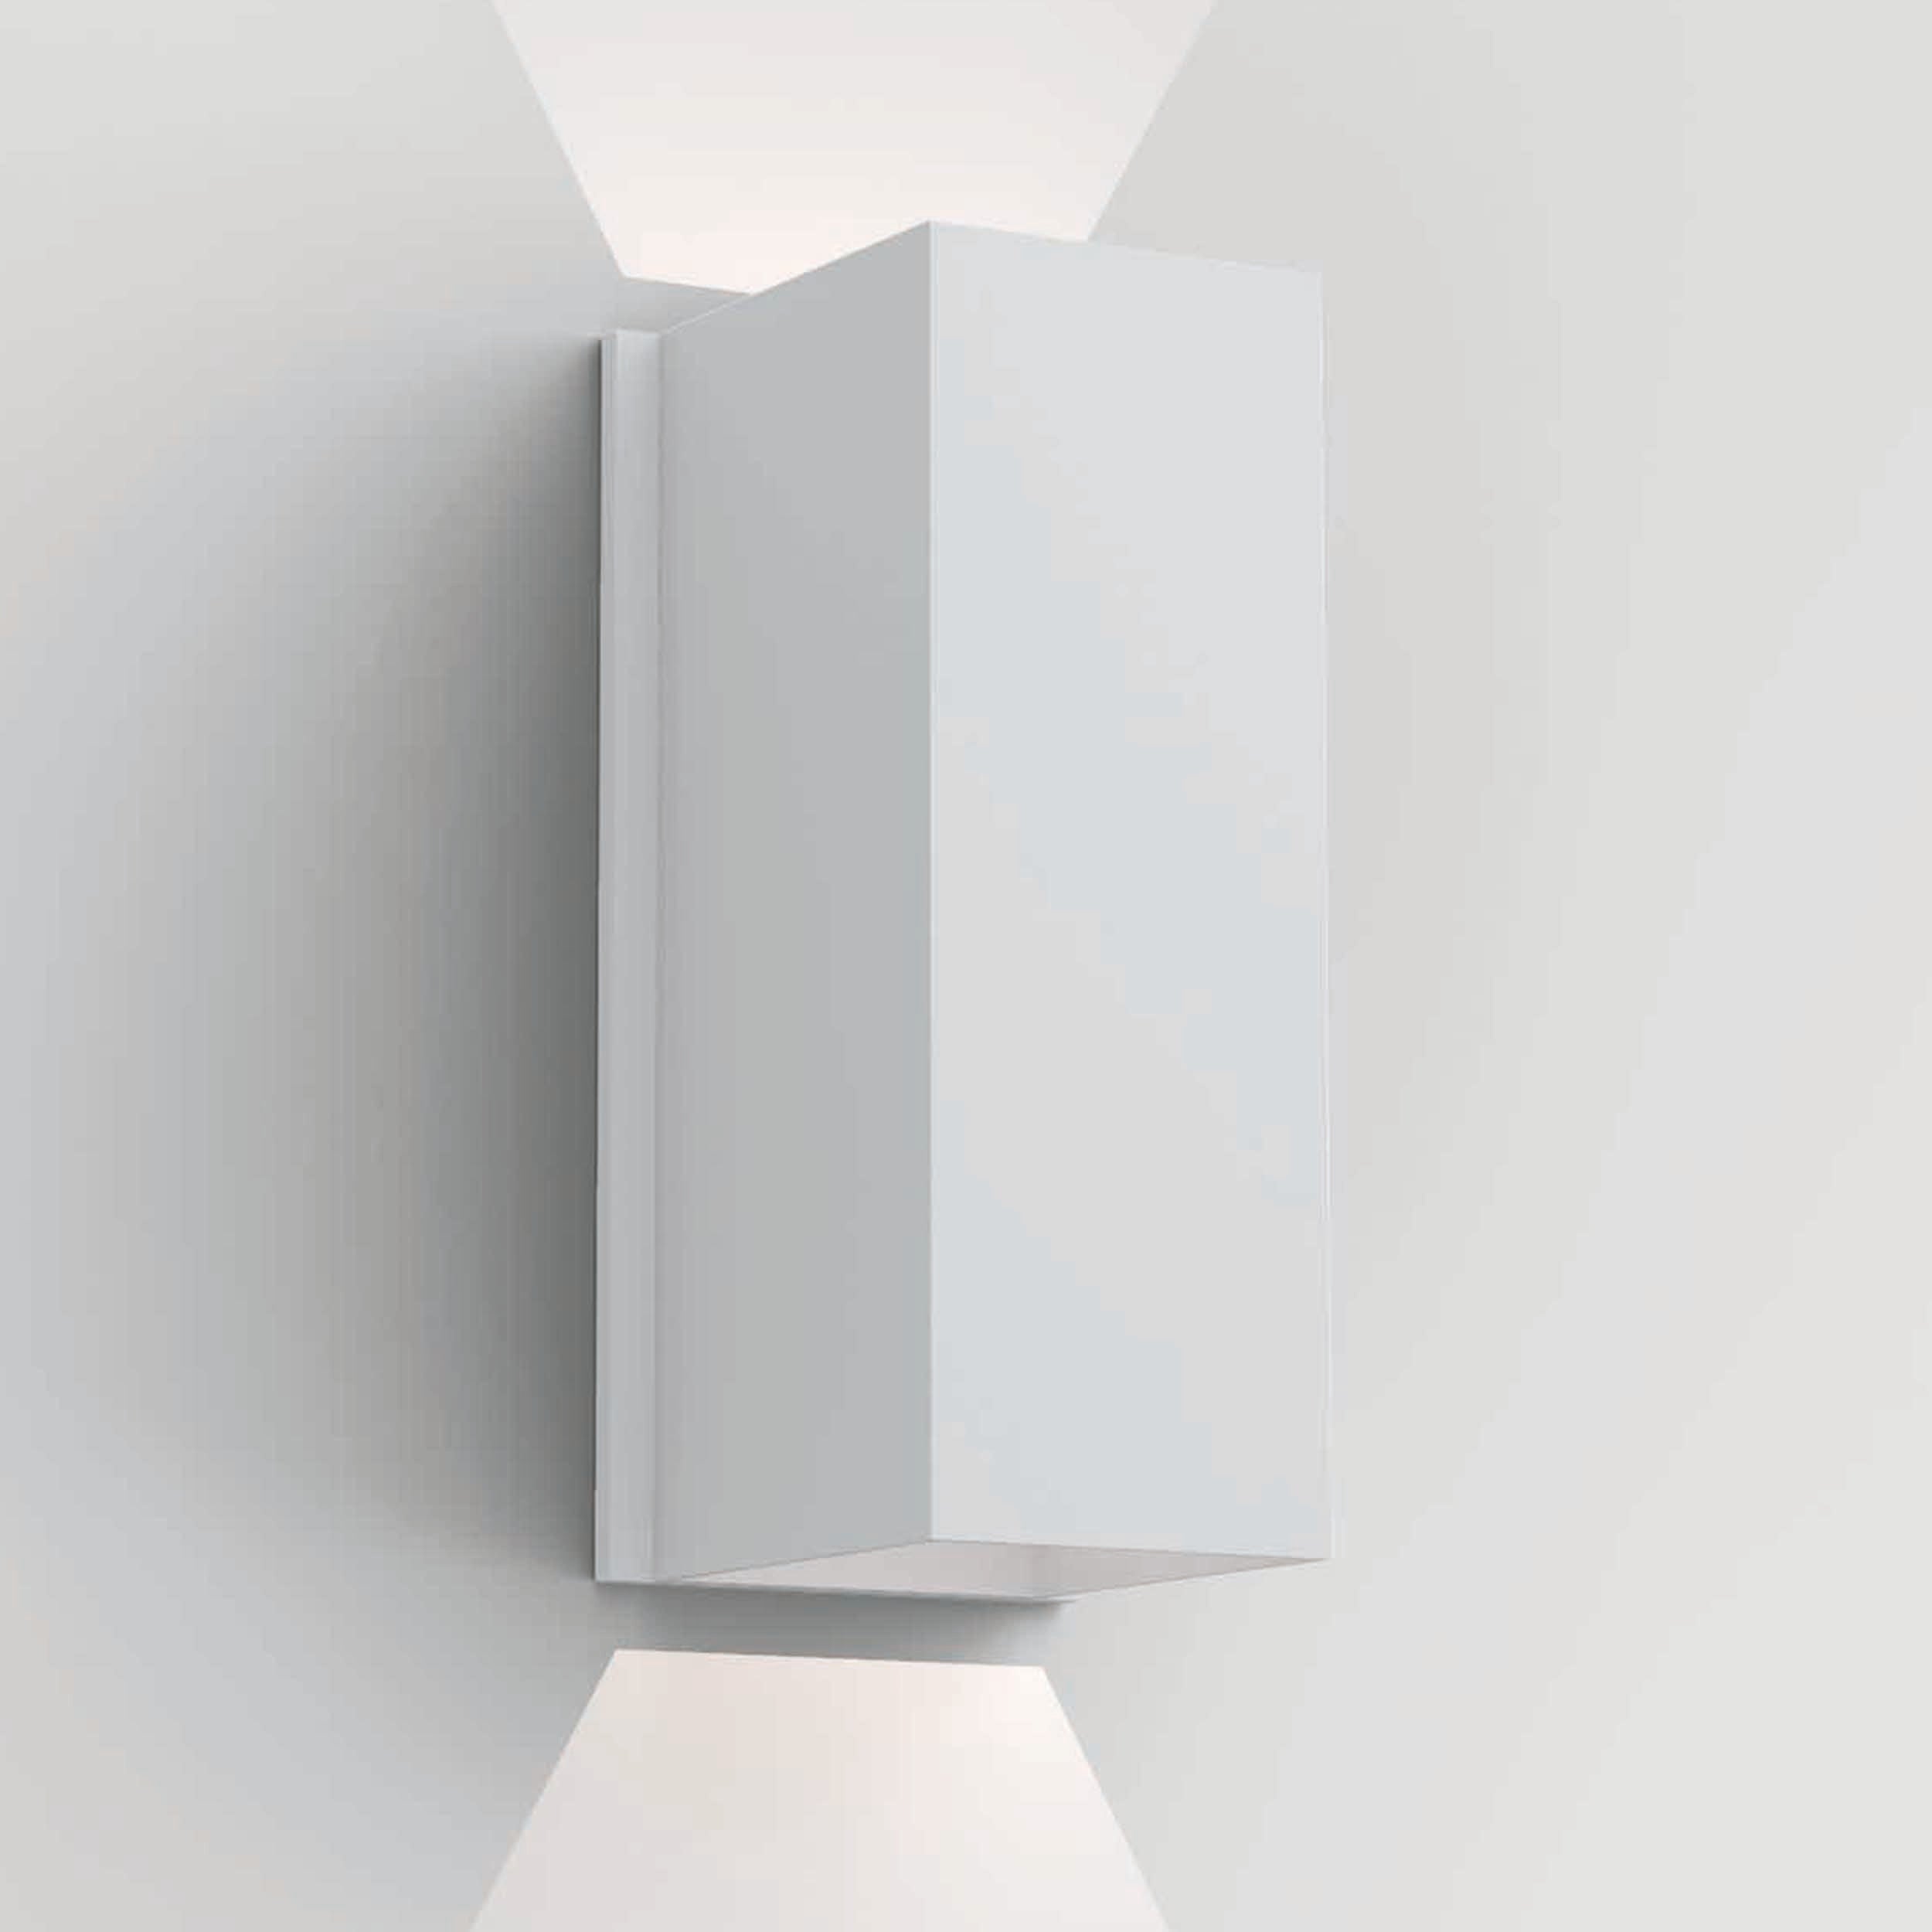 Astro Lighting Oslo Wall Light Fixtures Astro Lighting 4.57x4.33x10.04 Textured White Yes (Integral), COB LED